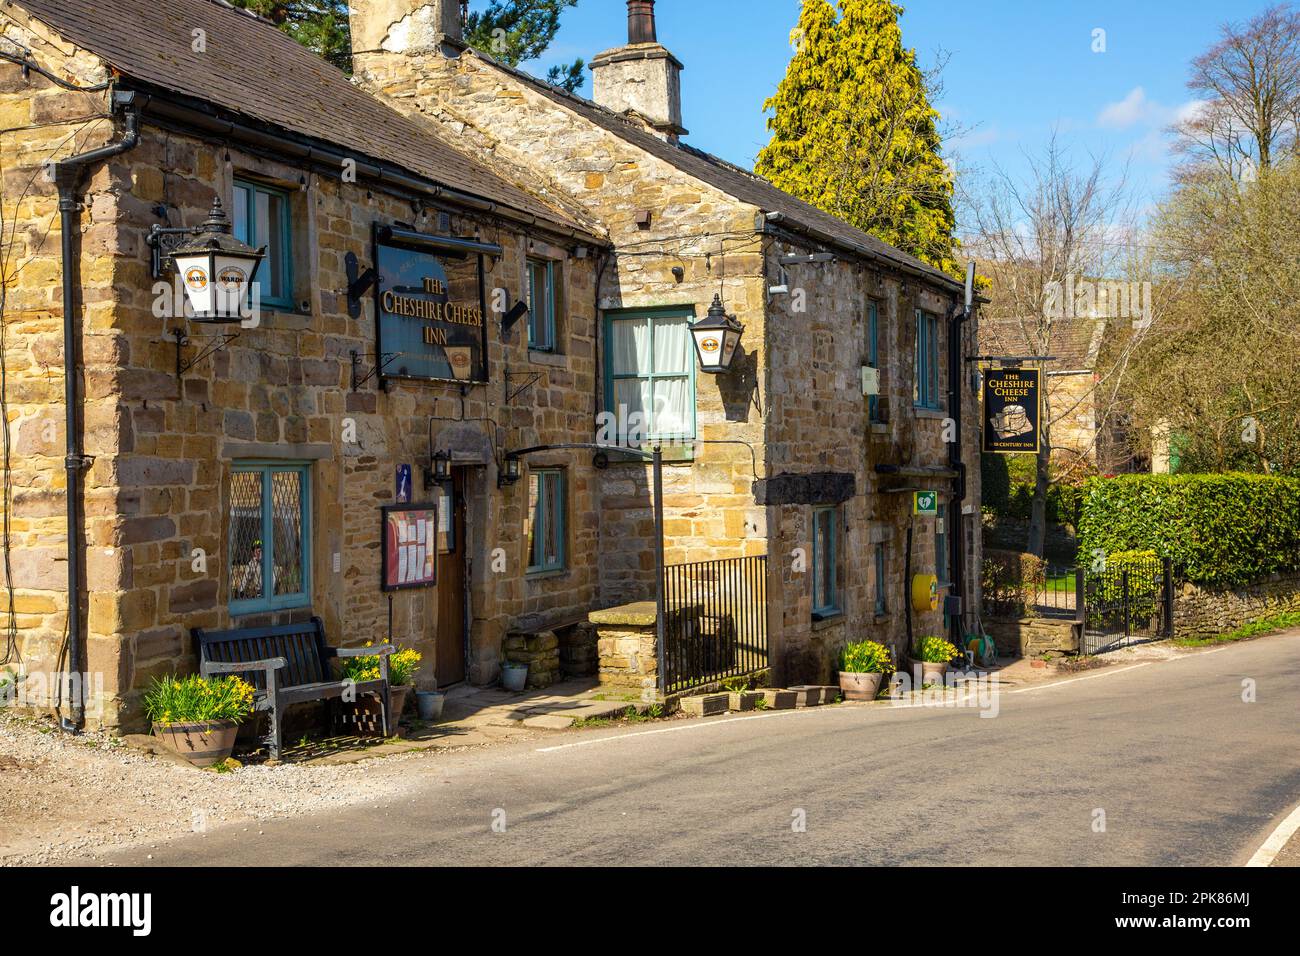 Old traditional coaching inn the Cheshire Cheese in the Derbyshire village of Hope at the foot of the great ridge to Mam Tor Stock Photo